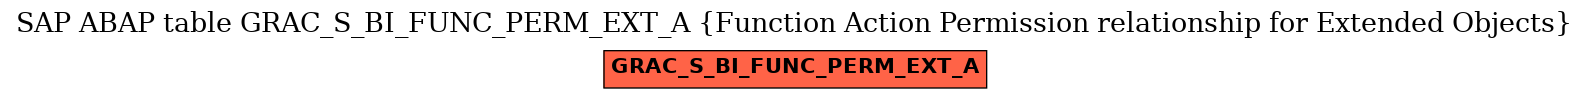 E-R Diagram for table GRAC_S_BI_FUNC_PERM_EXT_A (Function Action Permission relationship for Extended Objects)